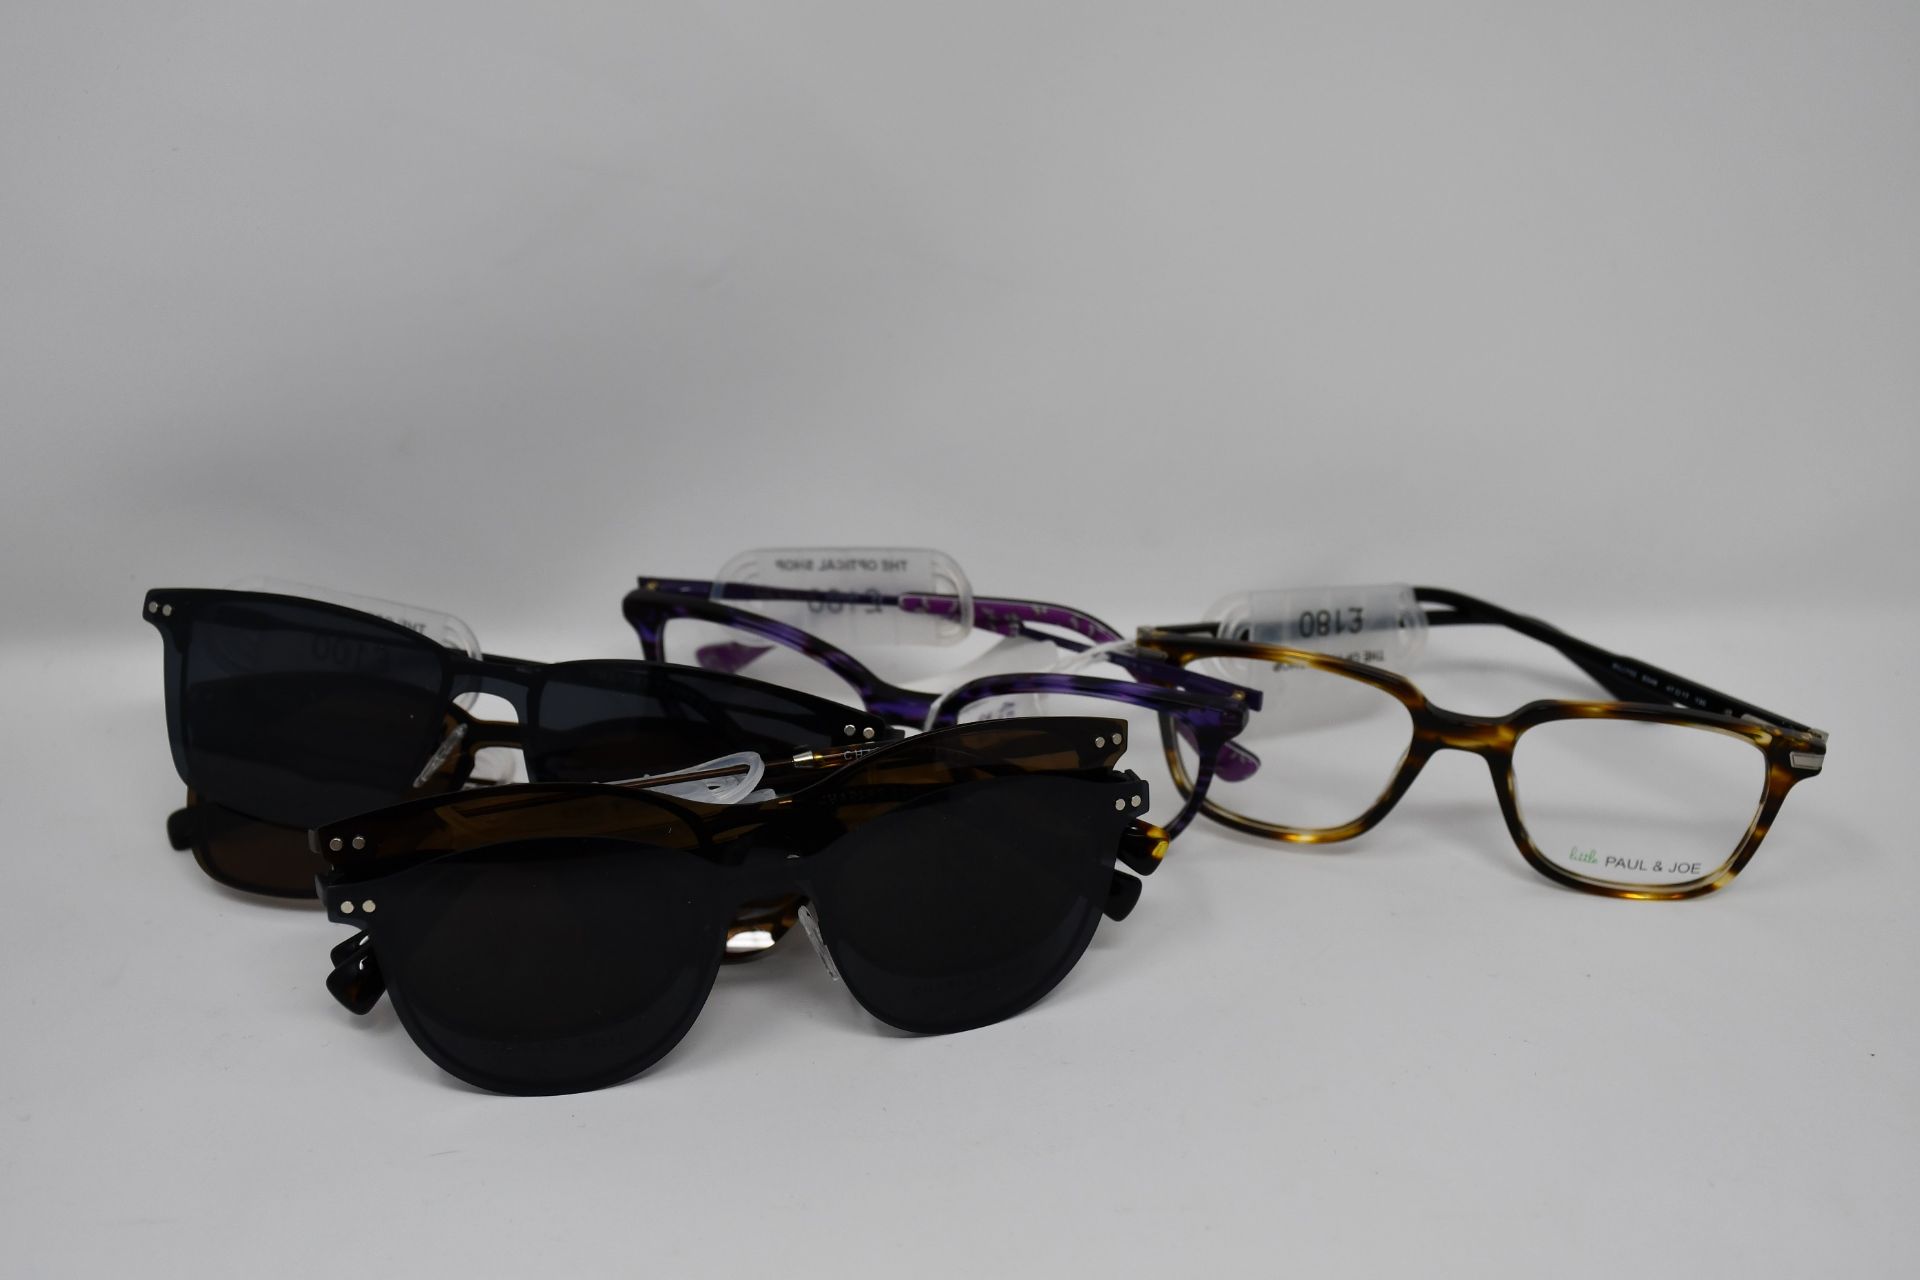 Two pairs of as new Little Paul & Joe glasses frames with clear glass (RRP £180 each) and four pairs